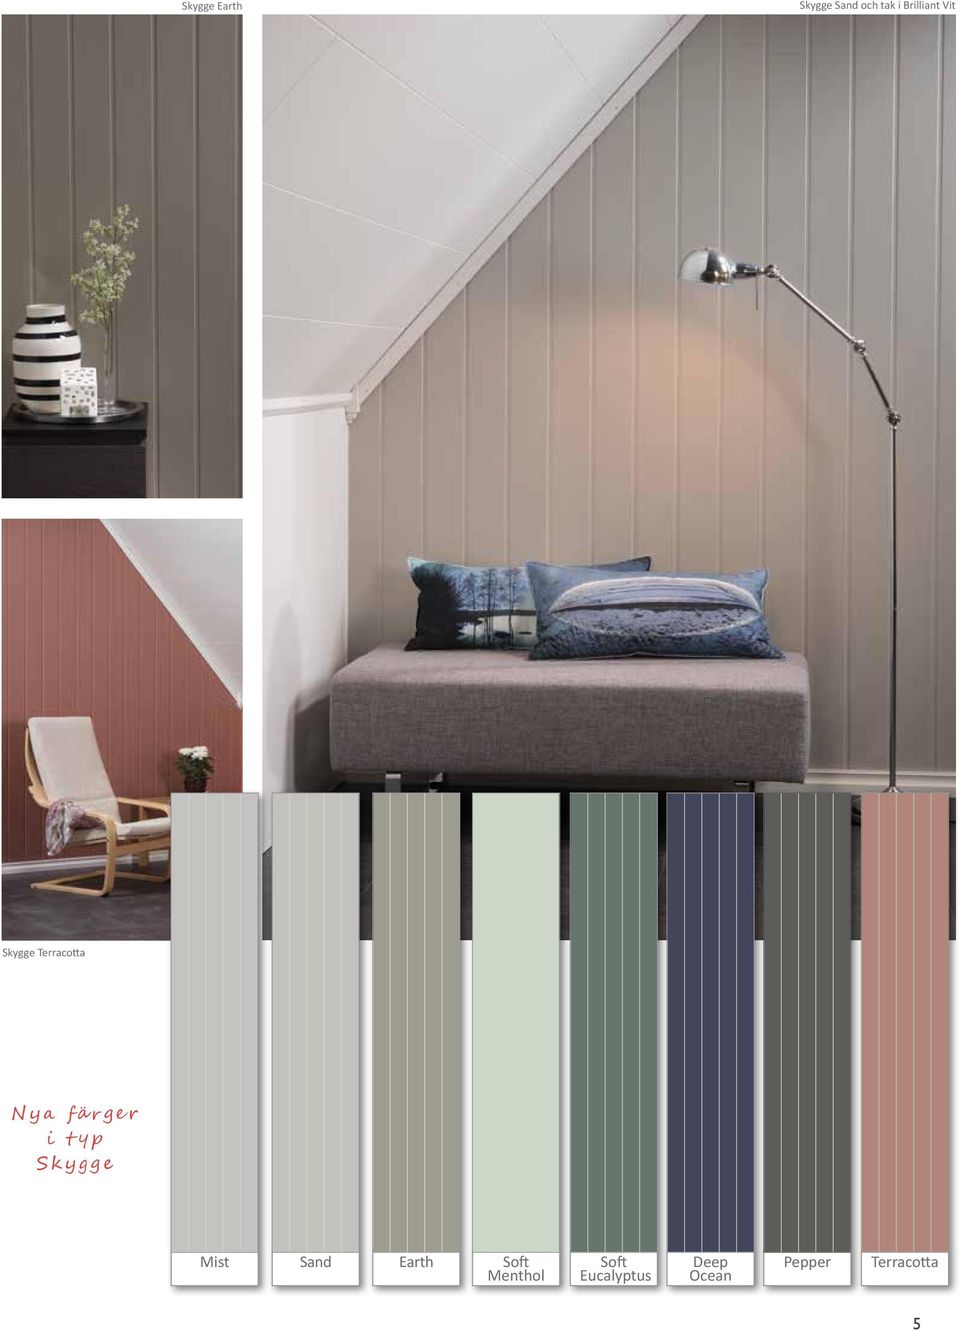 typ Skygge Mist Sand Earth Soft Soft